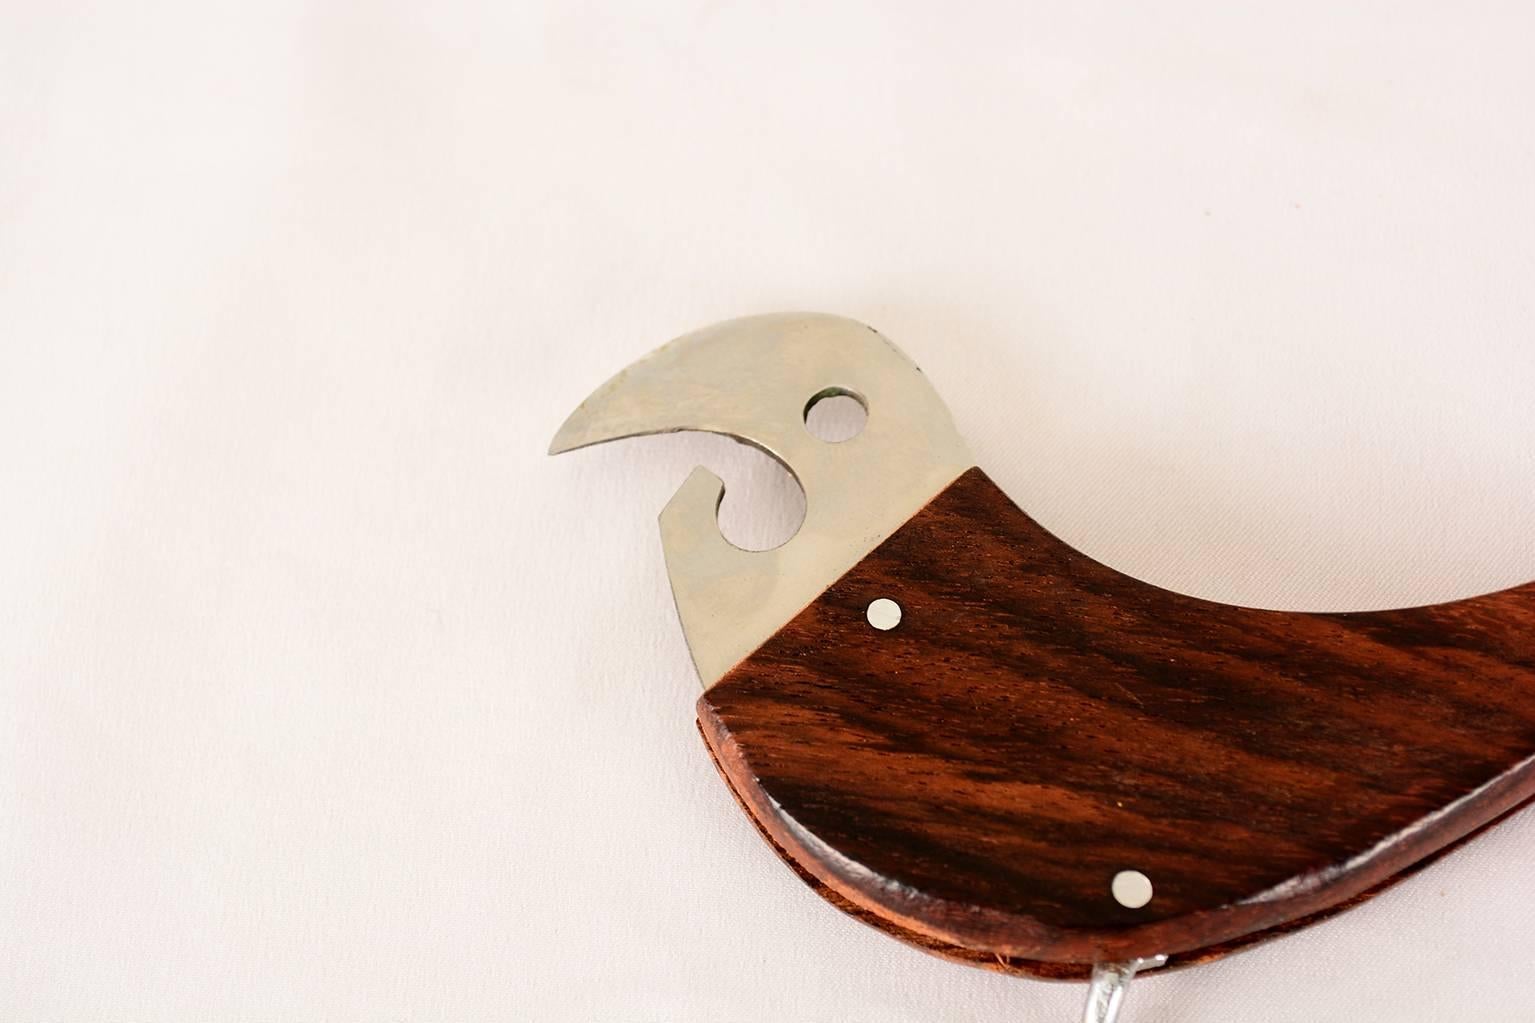 For your consideration a beautiful bird bottle opener in stainless steel and rosewood,
1960s.